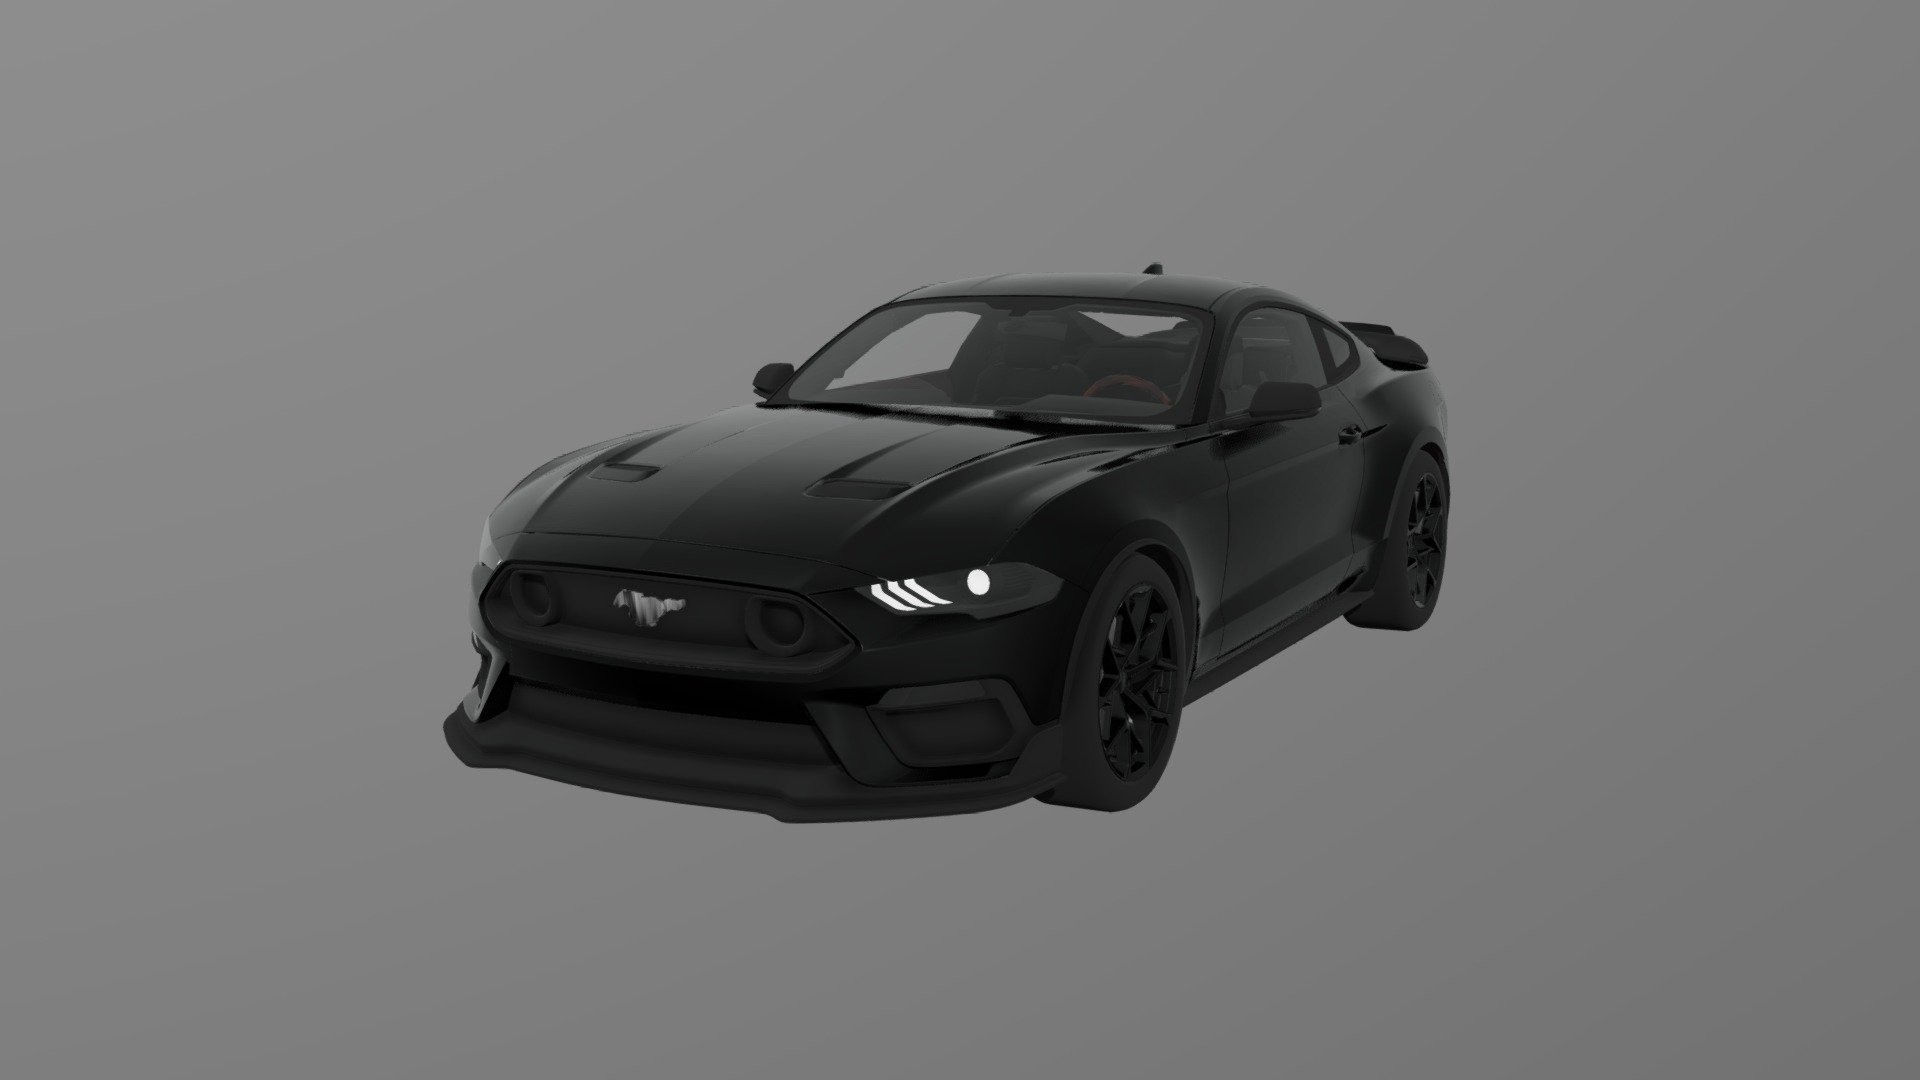 Ford Mustang GT, with full interior, from the game Dimensional Drift. https://store.steampowered.com/app/1923770/Dimensional_Drift/ If you use this model, all I request is that you wishlist Dimensional Drift on steam.

Not animated, but it is game ready 3d model